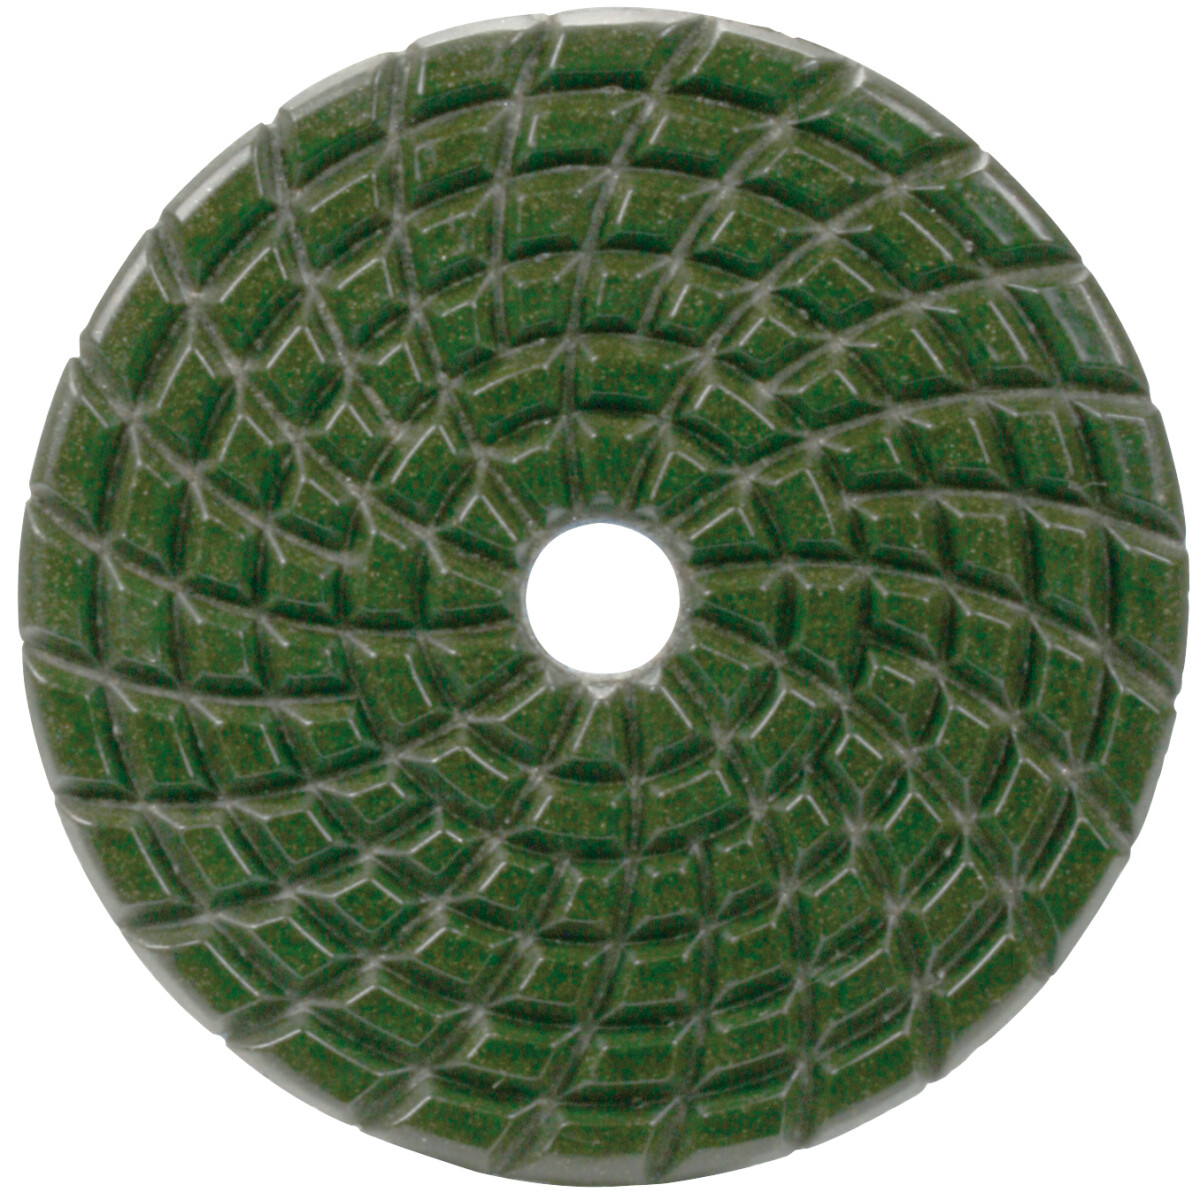  D-15637 1500 Grit Polishing Pad from Lawson HIS